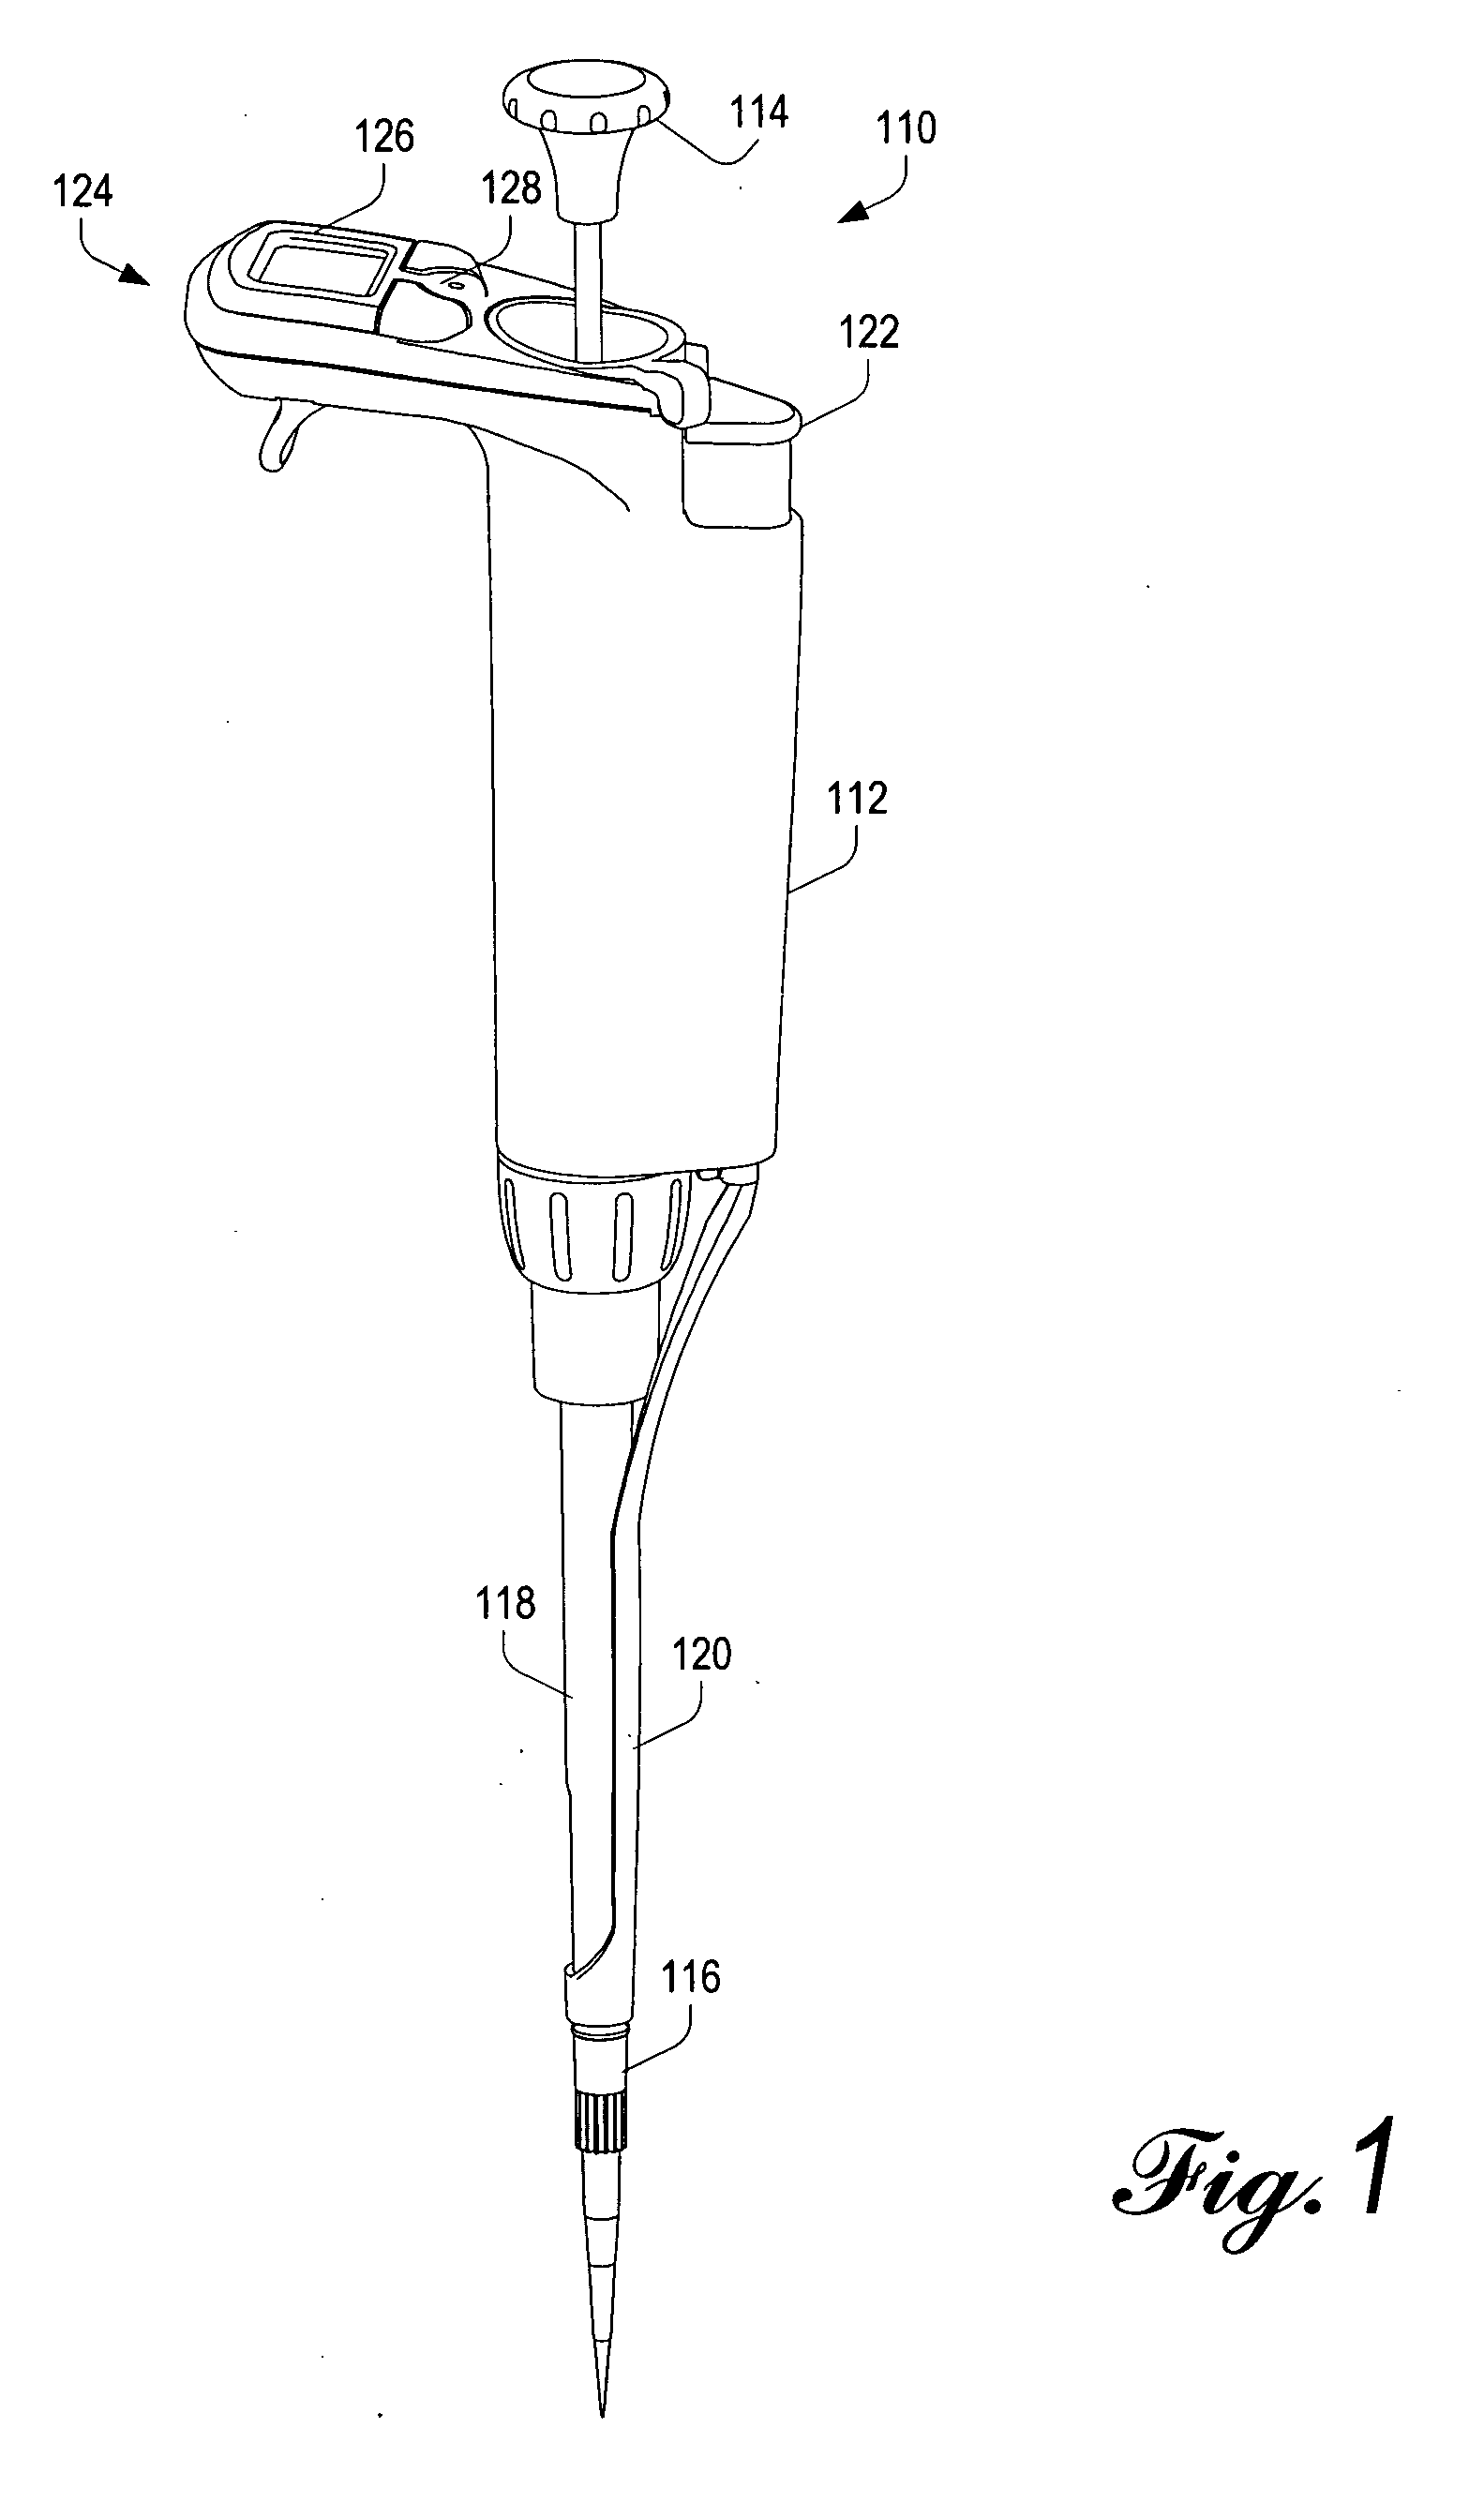 Hybrid manual-electronic pipette